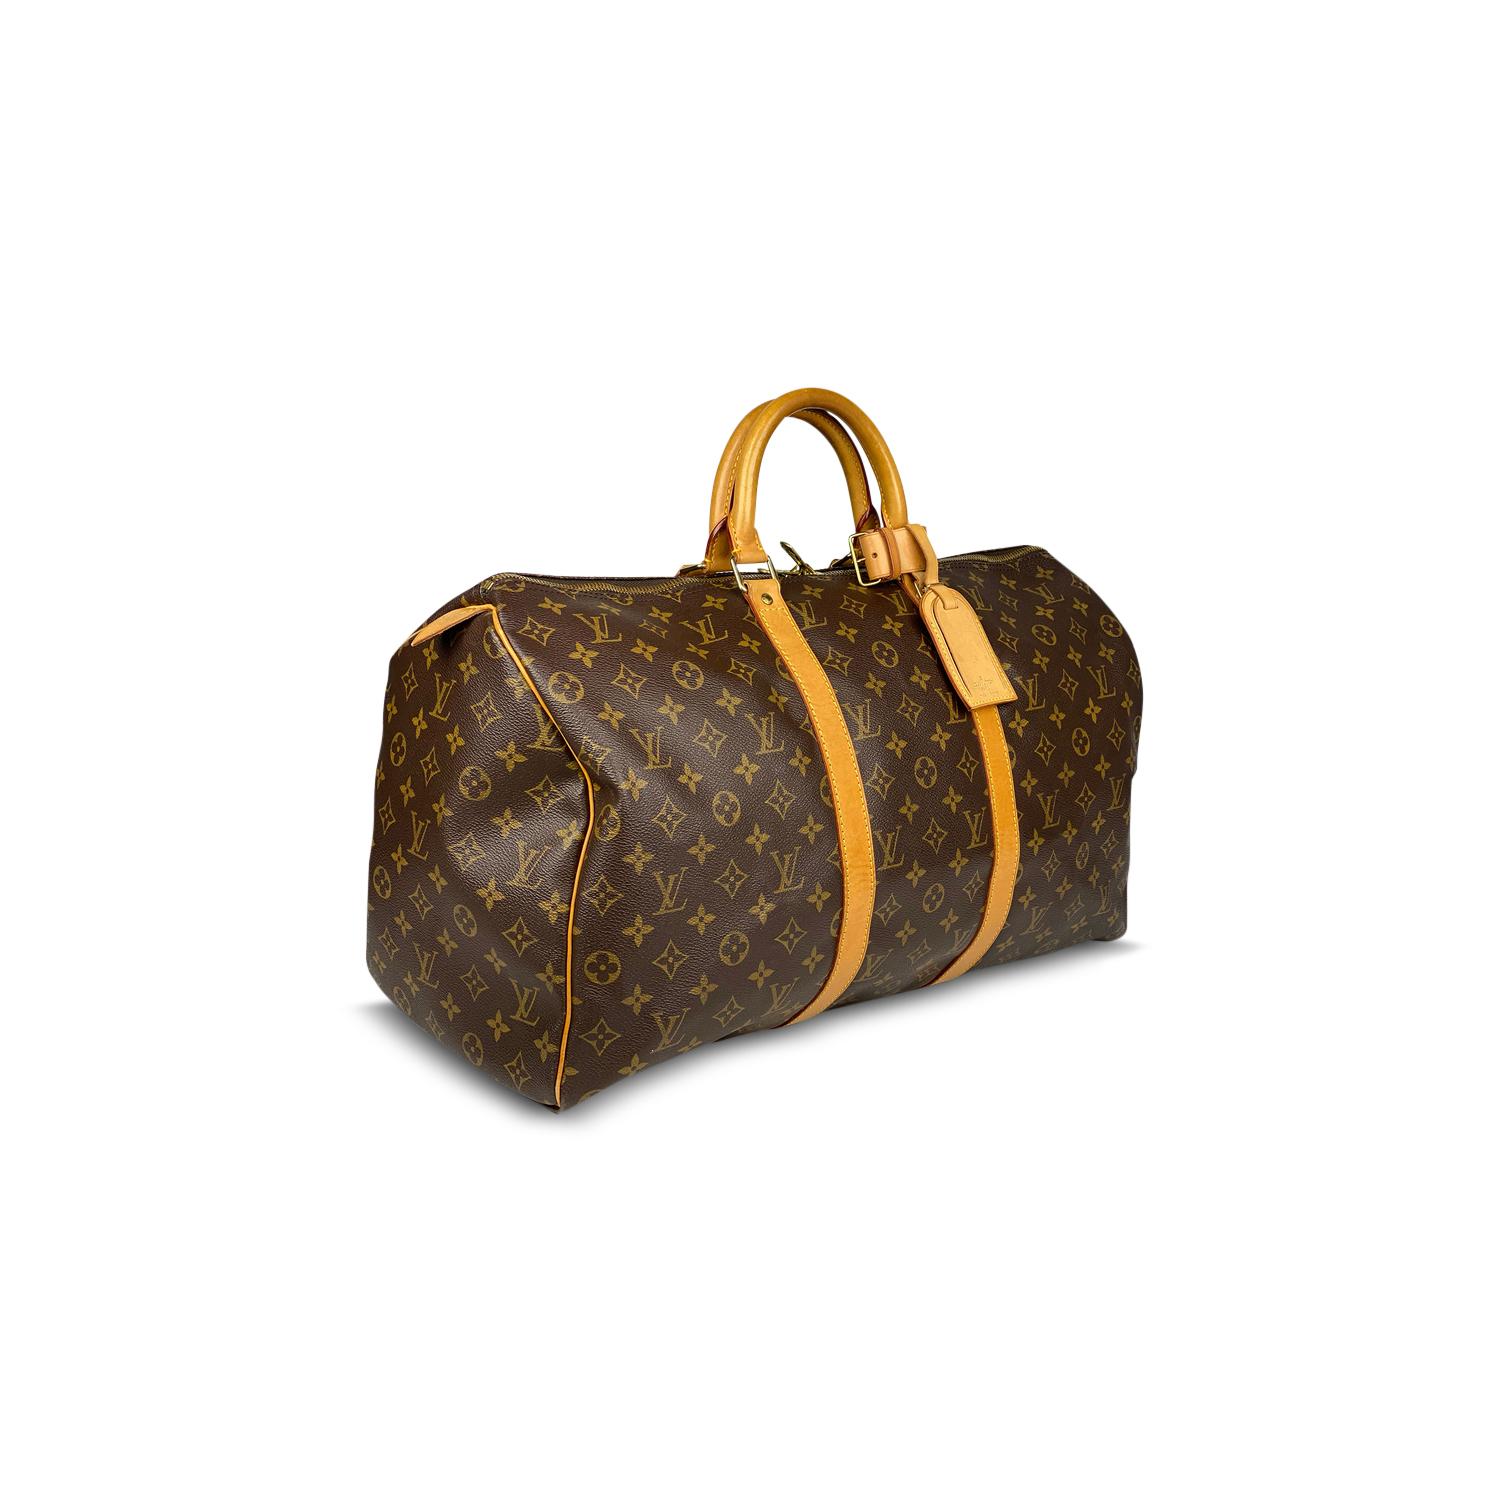 Brown and tan monogram coated canvas Louis Vuitton Keepall 50 with

– Brass hardware
– Tan vachetta leather trim
– Dual rolled top handles
– Tonal canvas lining and two-way zip closure at top

Overall Preloved Condition: Very Good

Exterior